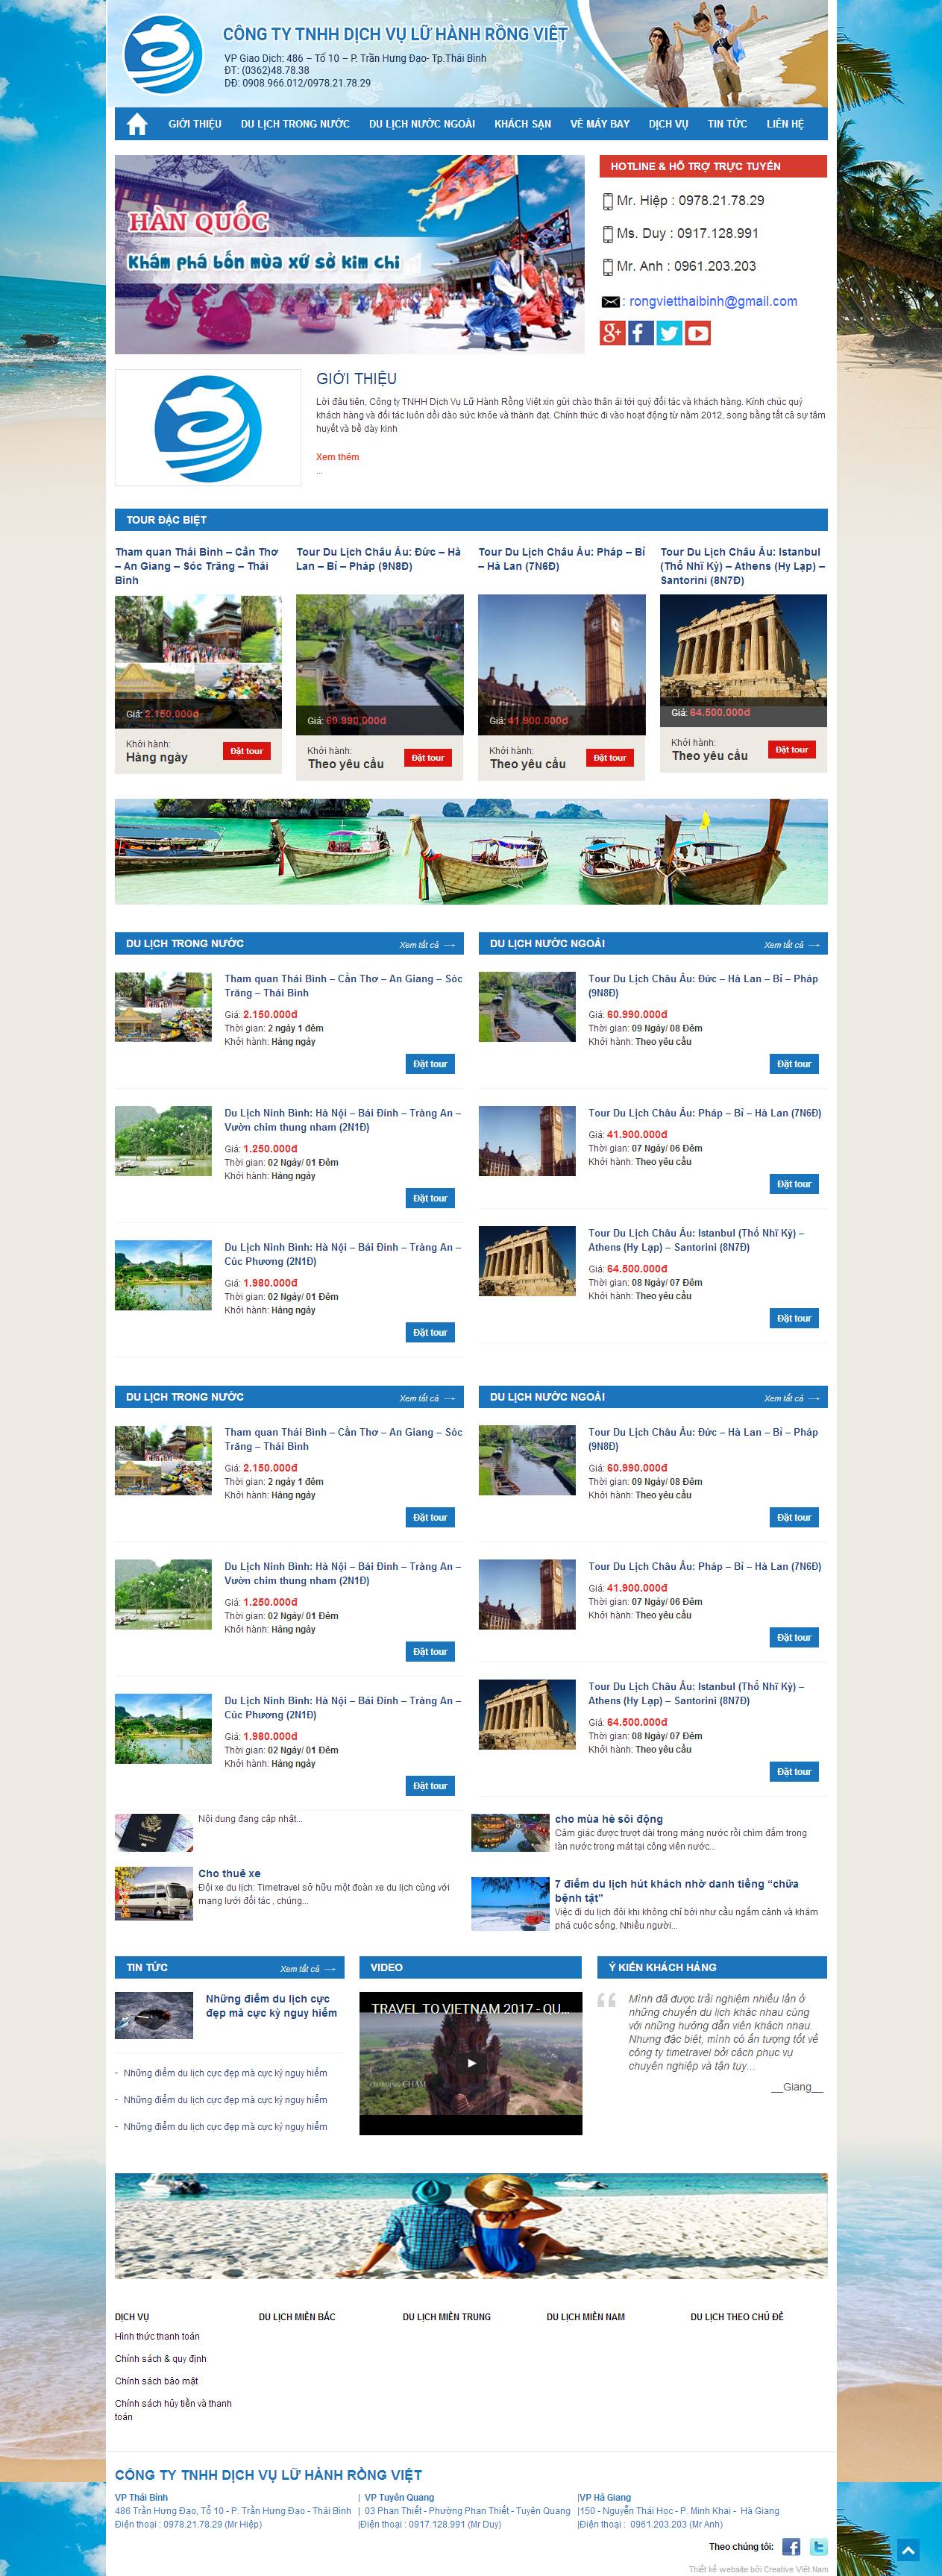 website design packages with airfare under $500